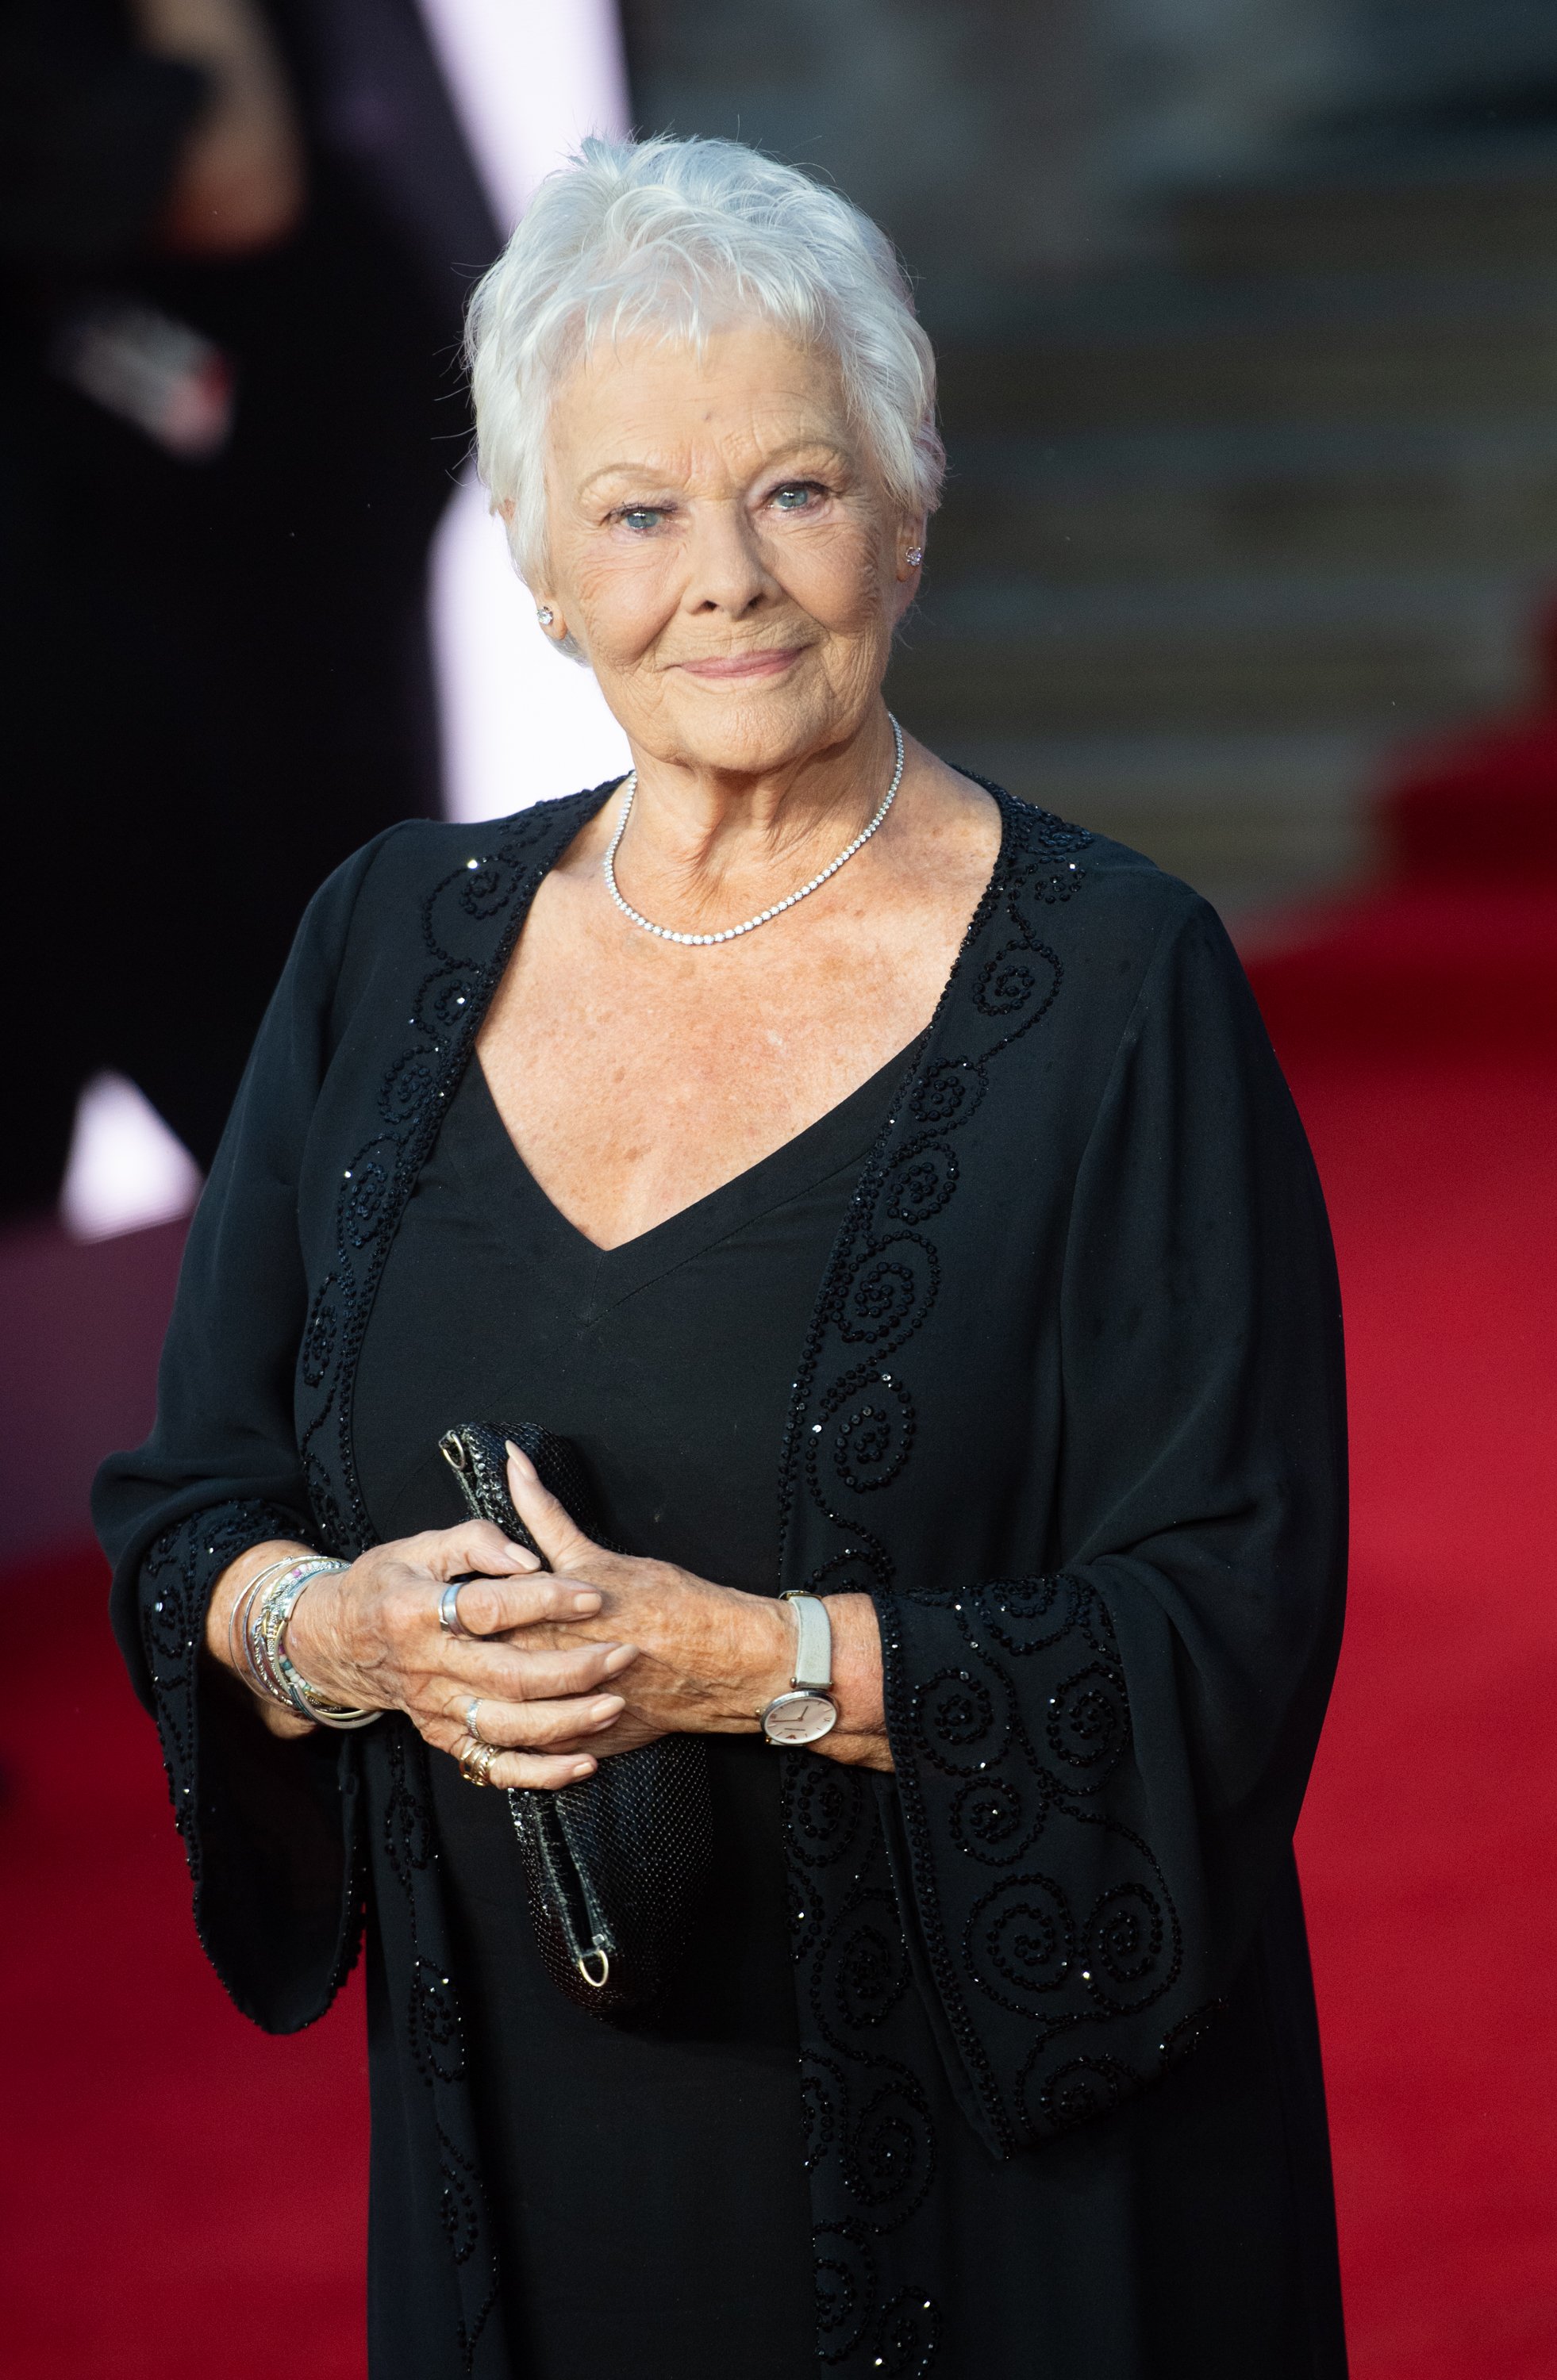 Judi Dench attends the "No Time To Die" World Premiere at Royal Albert Hall on September 28, 2021, in London, England. | Source: Getty Images